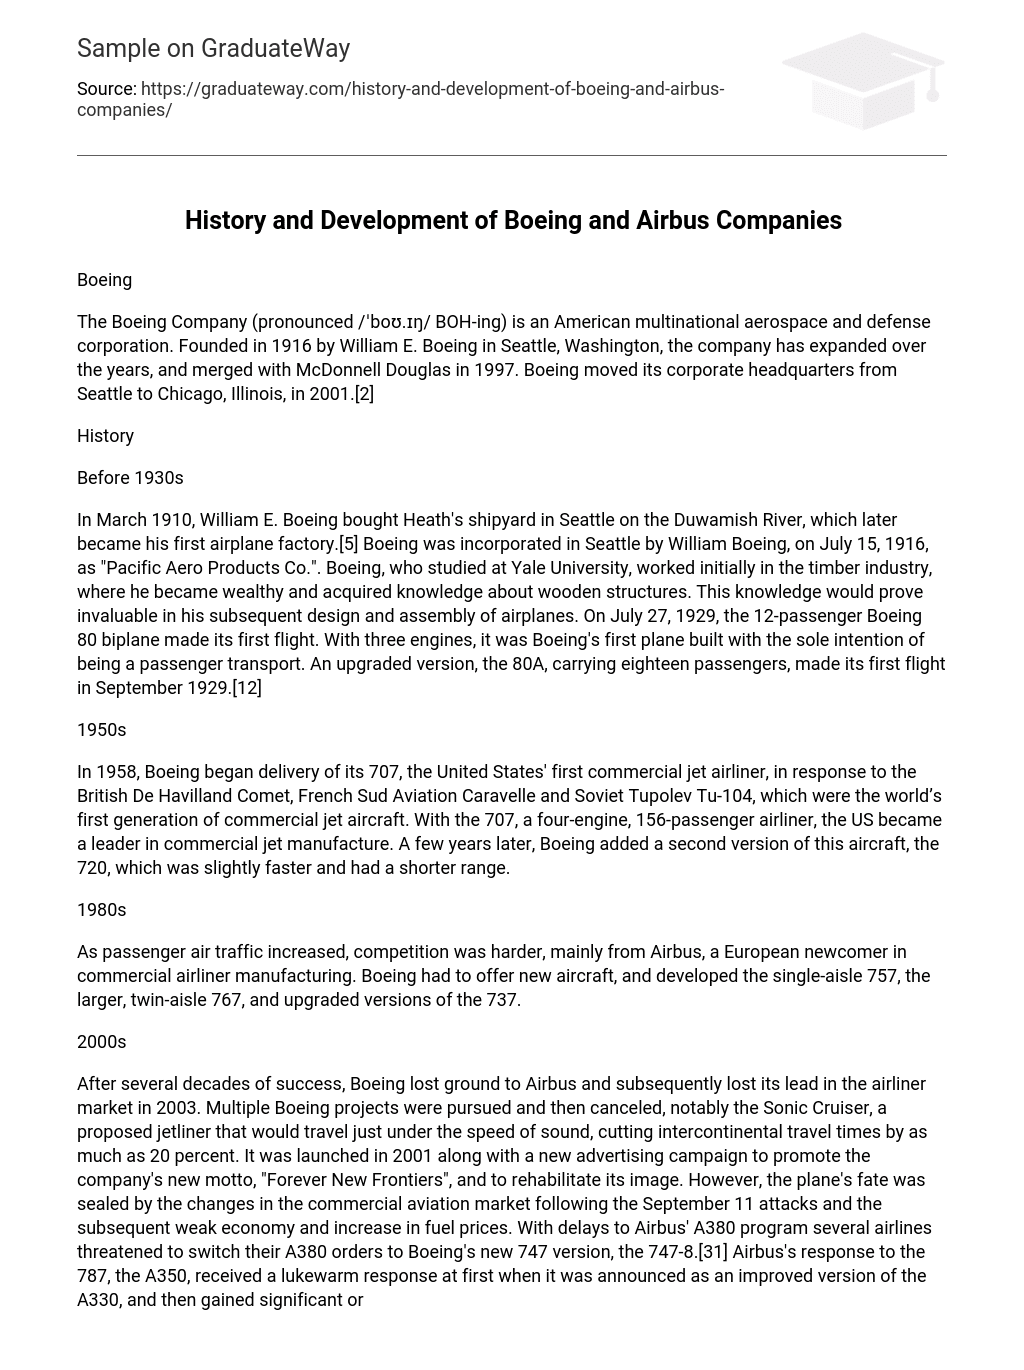 History and Development of Boeing and Airbus Companies Comparison